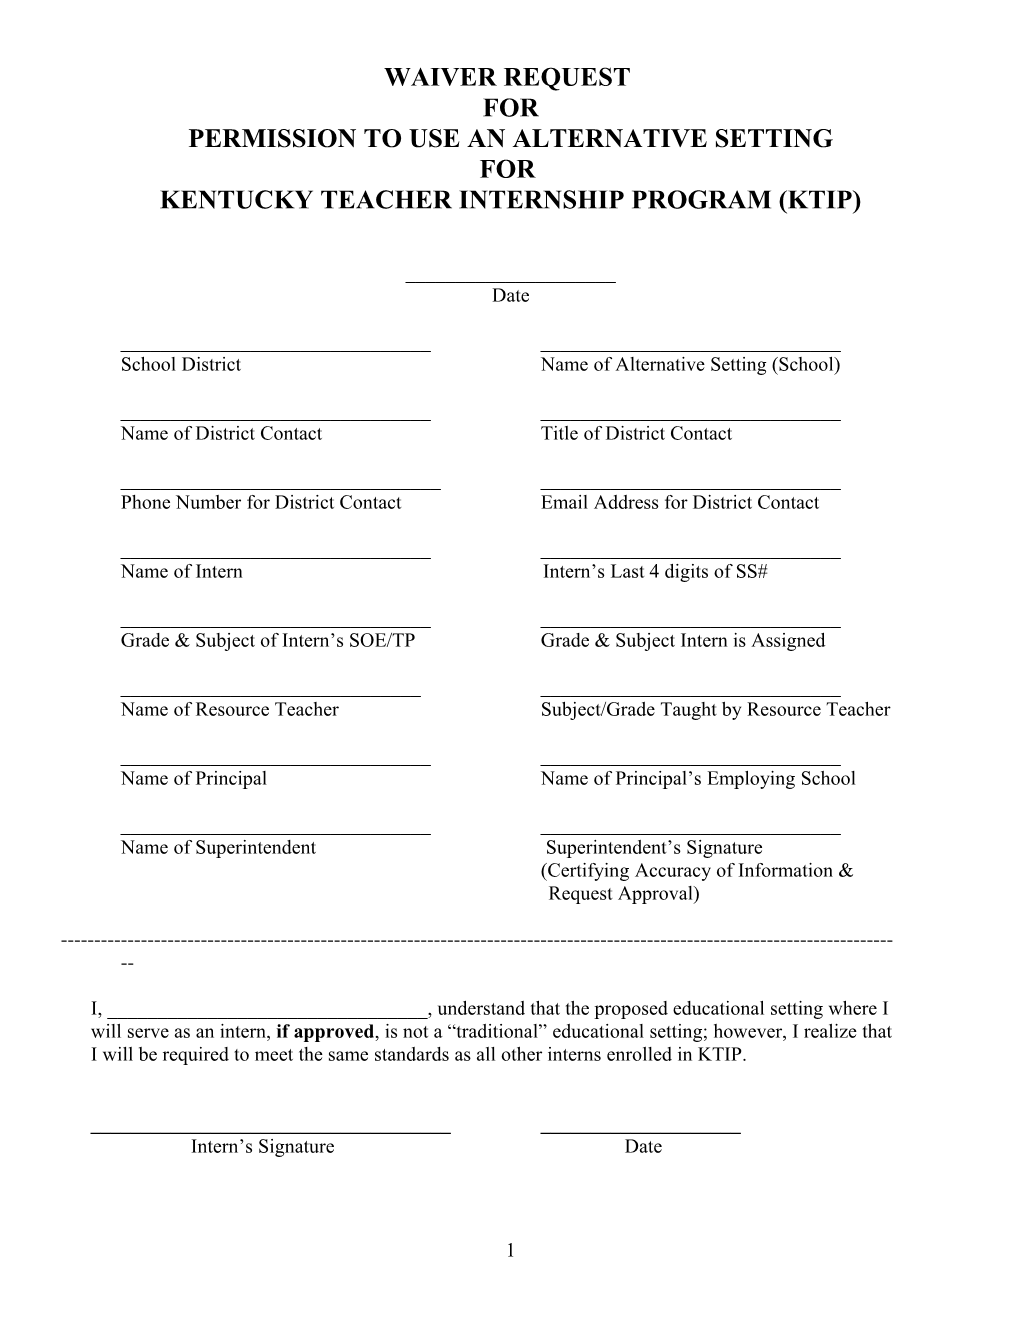 Request for Permission to Use Alternative Classroom Setting for Kentucky Teacher Internship